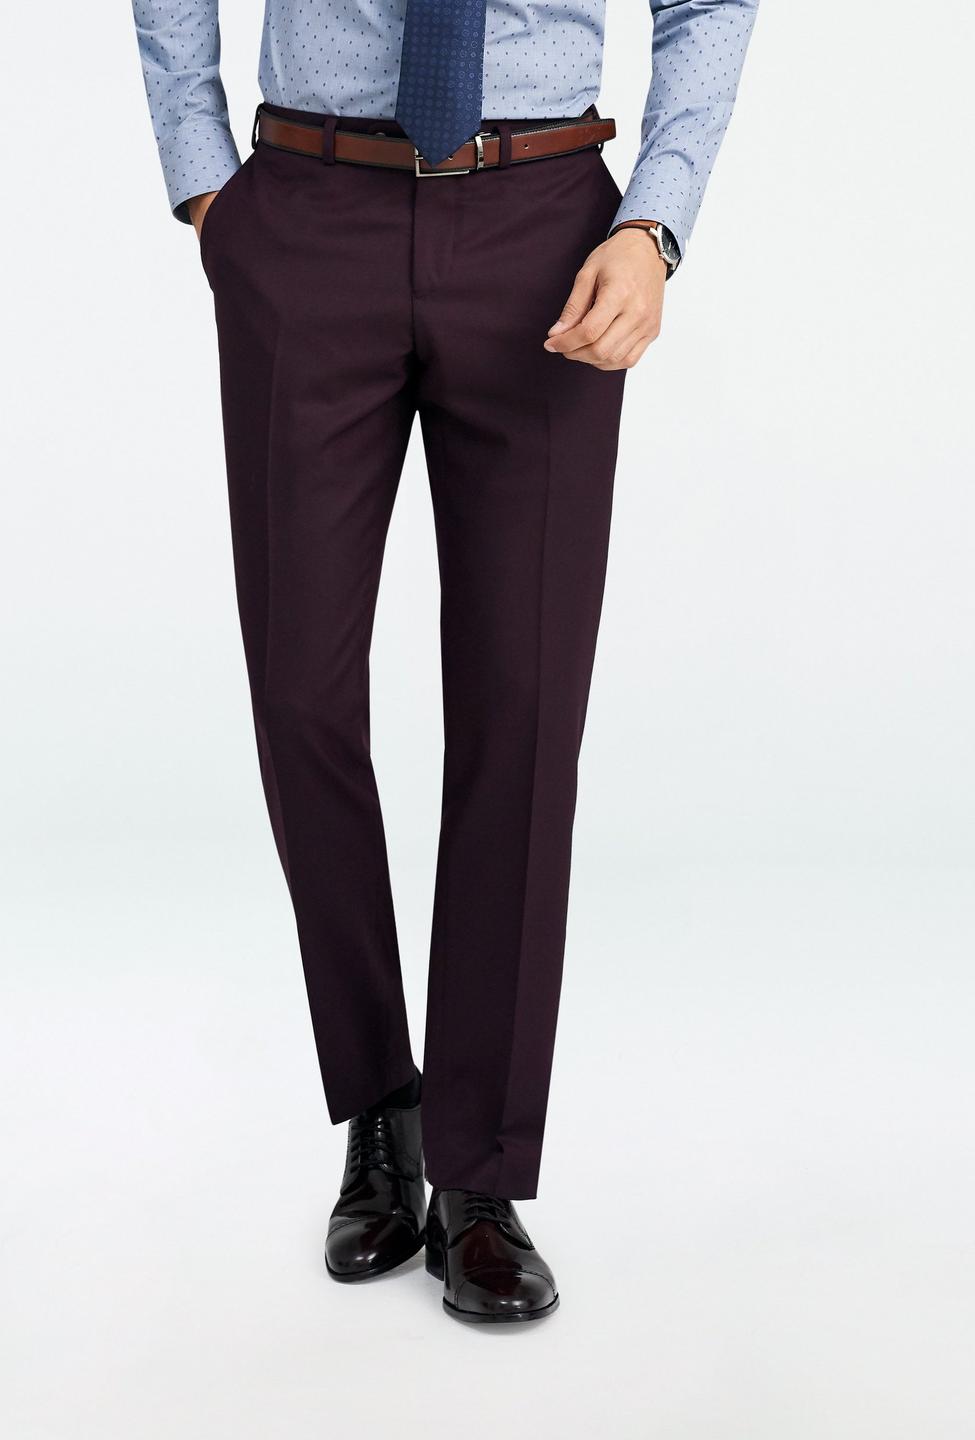 Burgundy pants - Hayward Solid Design from Luxury Indochino Collection